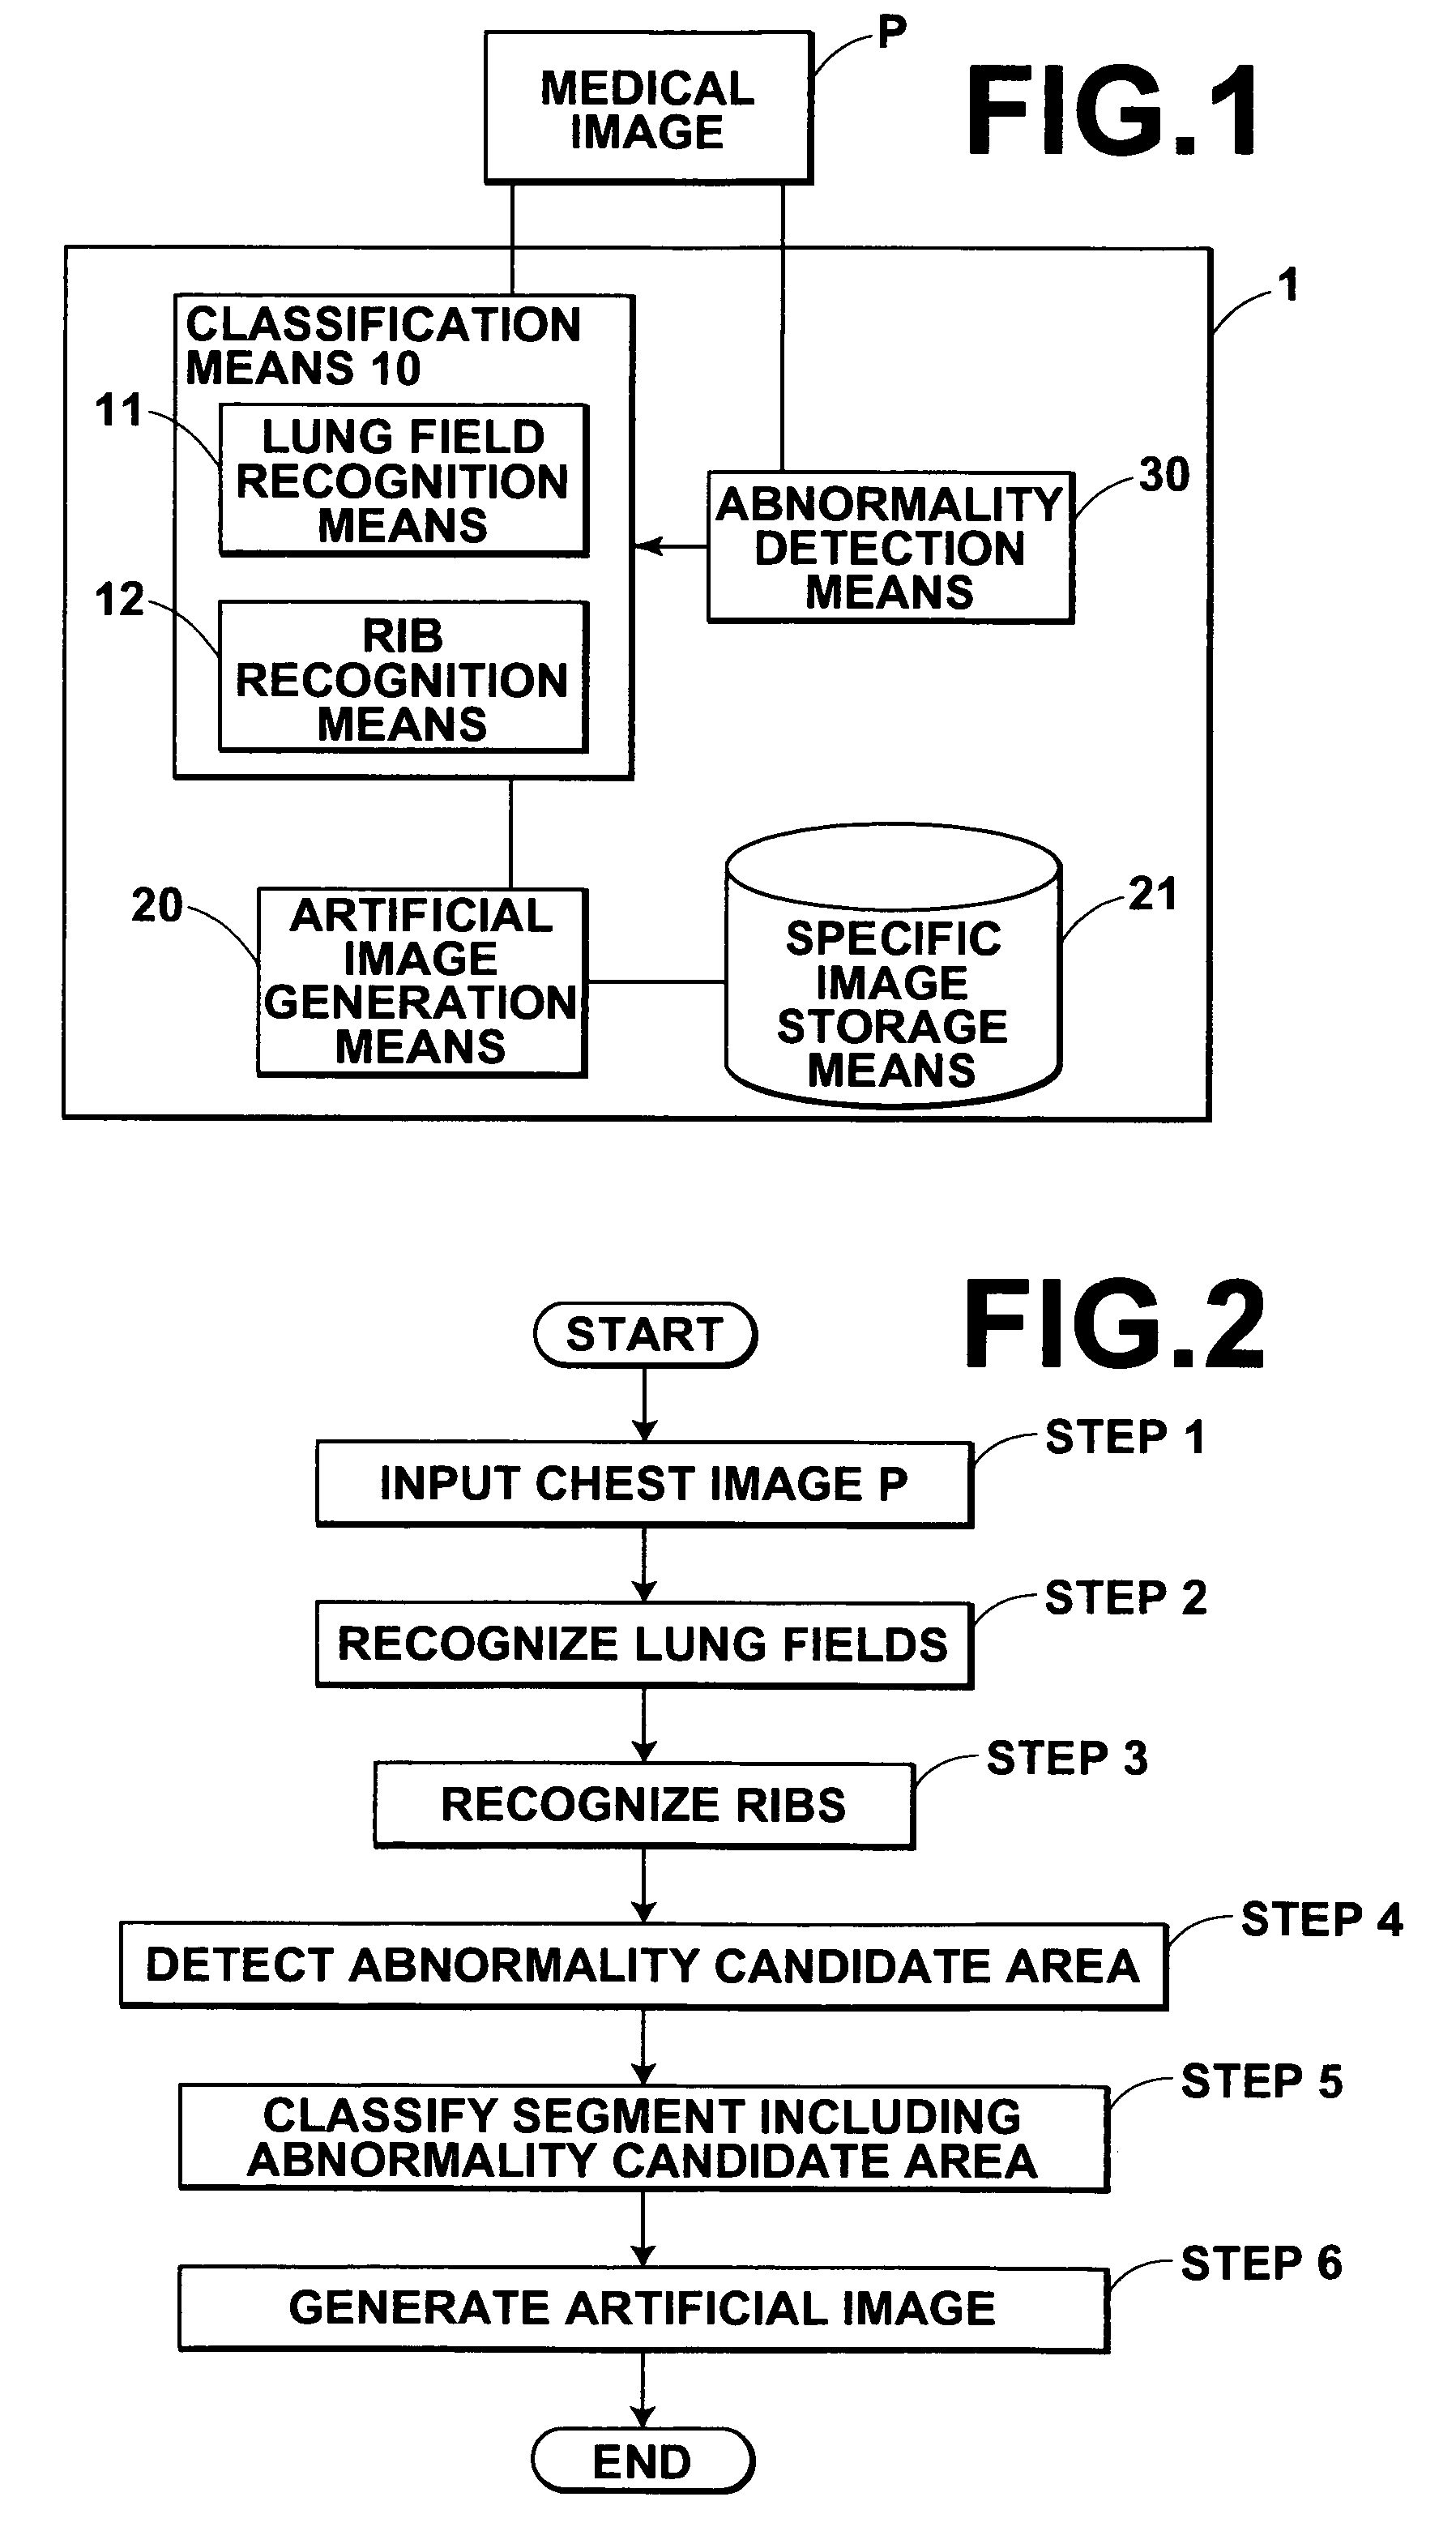 Image generation apparatus and image generation method for detecting abnormalities